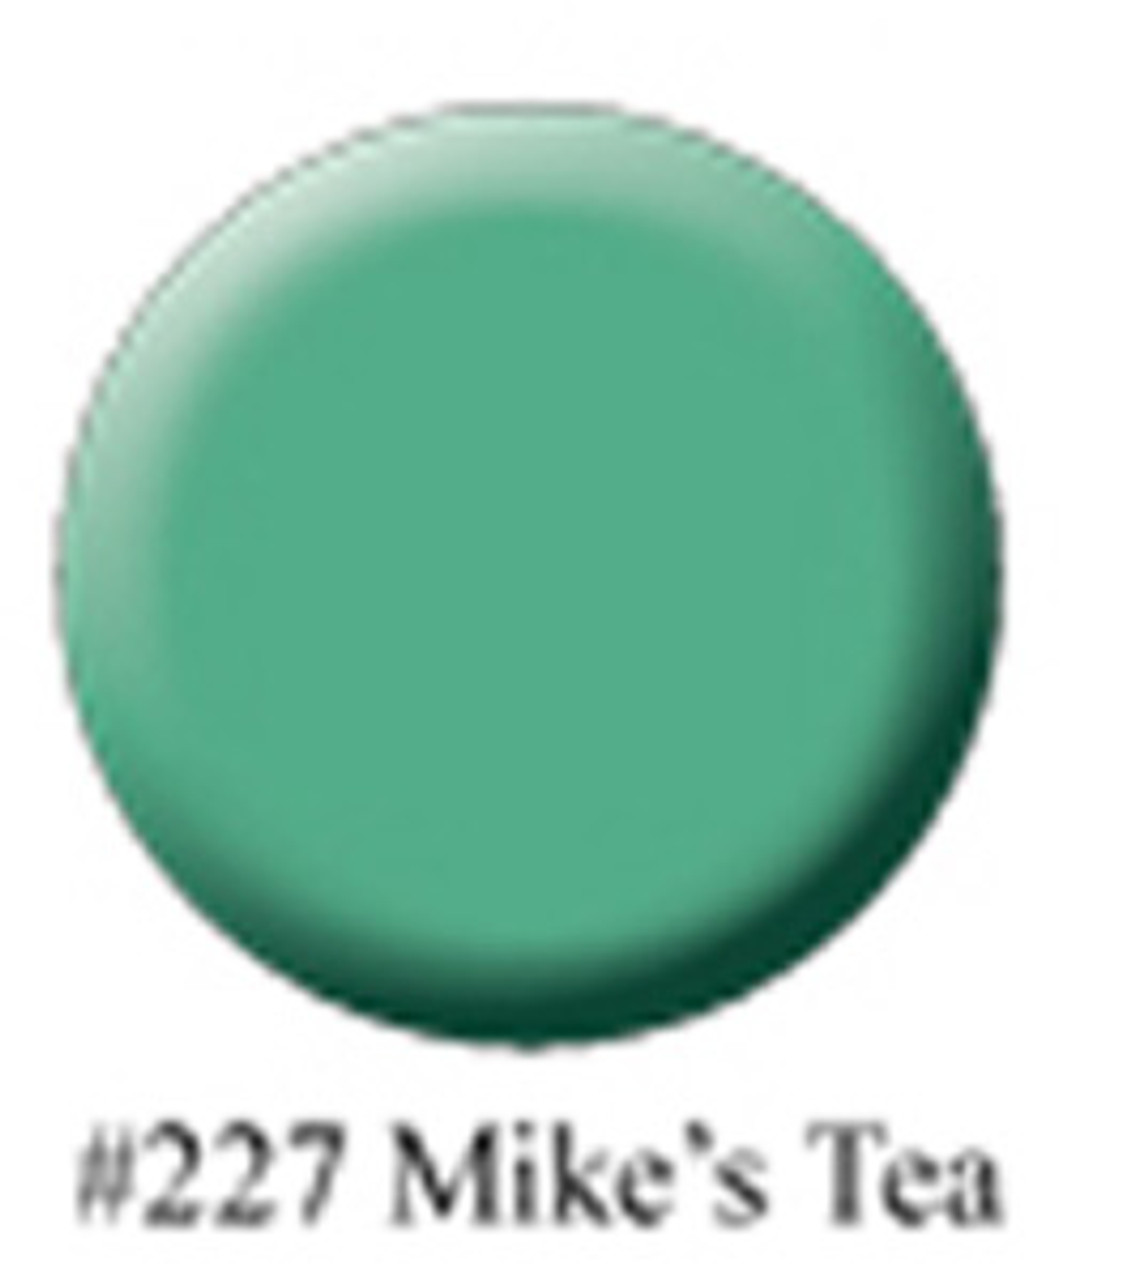 BASIC ONE - Gelacquer Mike's Tea - 1/4oz